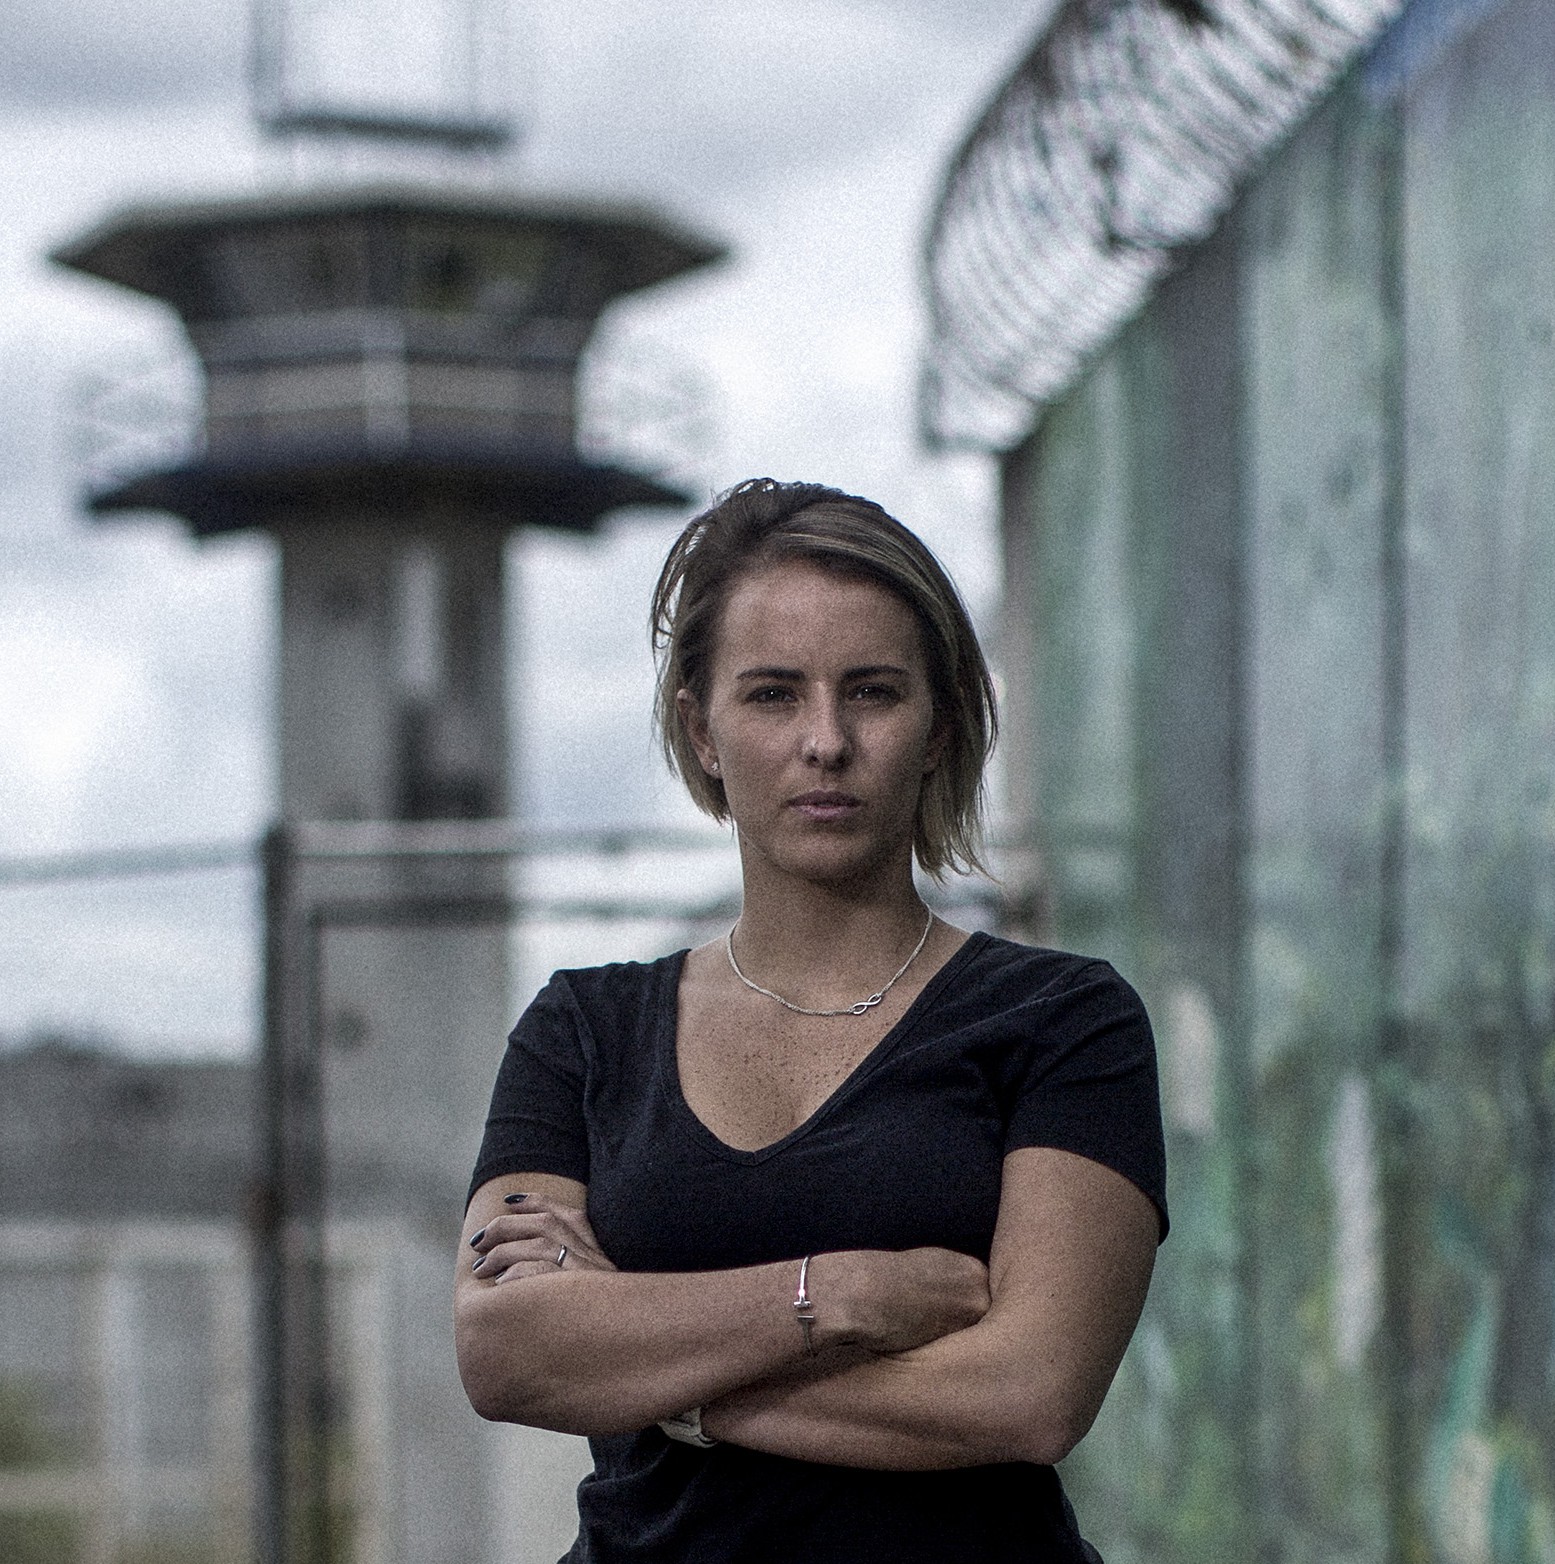 Portrait of Saskia Niño de Rivera, photographed in the Santa Marta prison in Mexico City. Niño de Rivera is the  founder of Reinserta un Mexicano, a non-profit organisation that she founded in Mexico to work for prisoners rights and advocacy within Mexico's prison system.